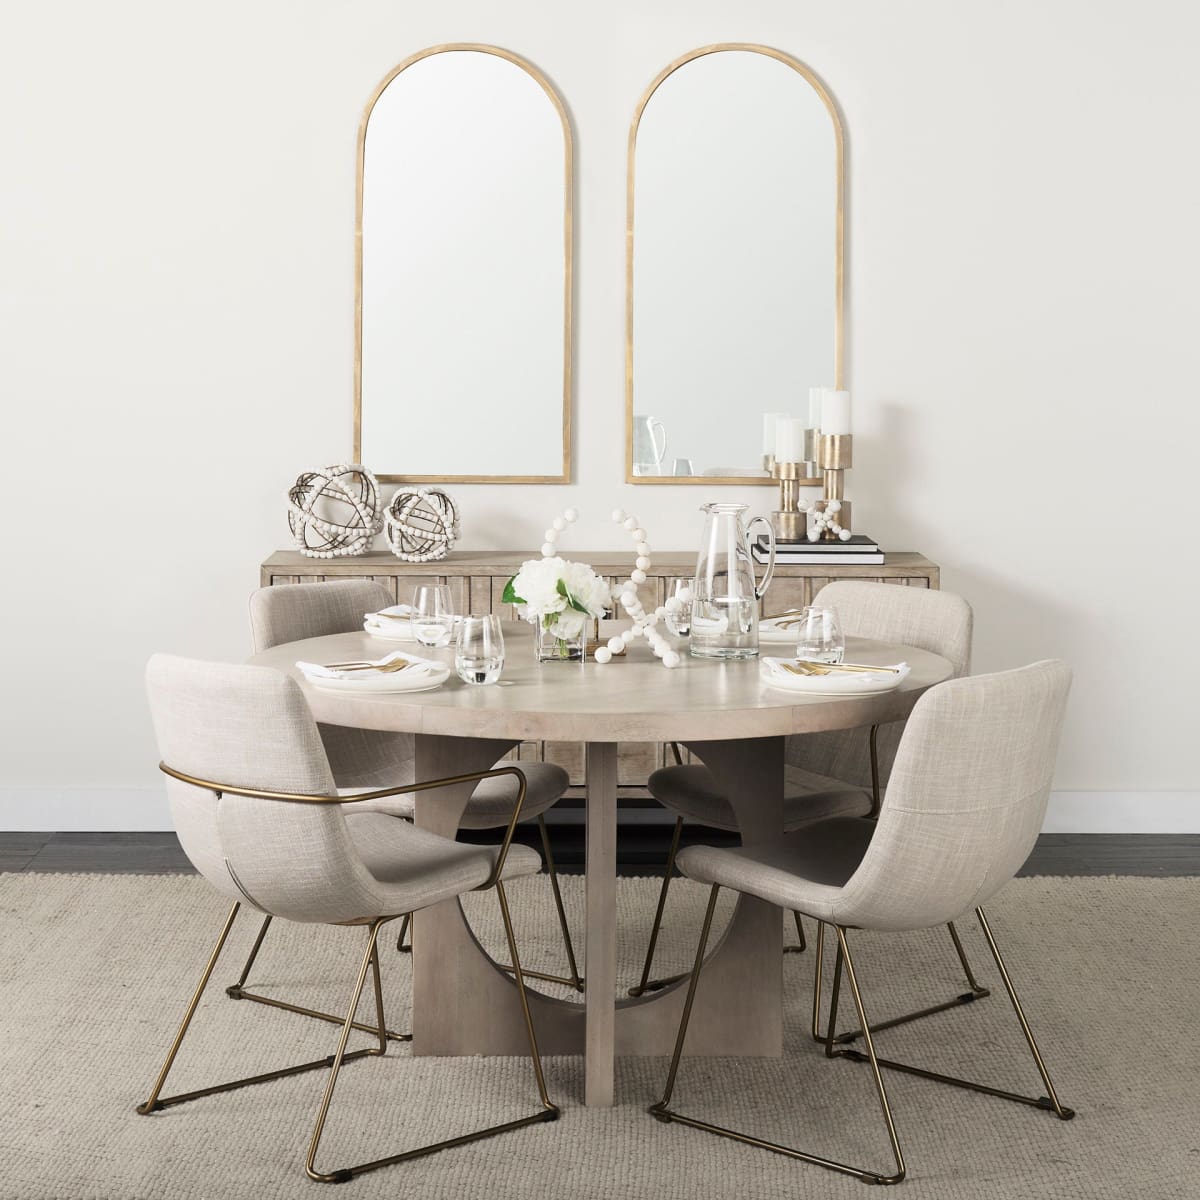 Giovanna Wall Mirror Gold Metal | Rounded Arch - wall-mirrors-grouped